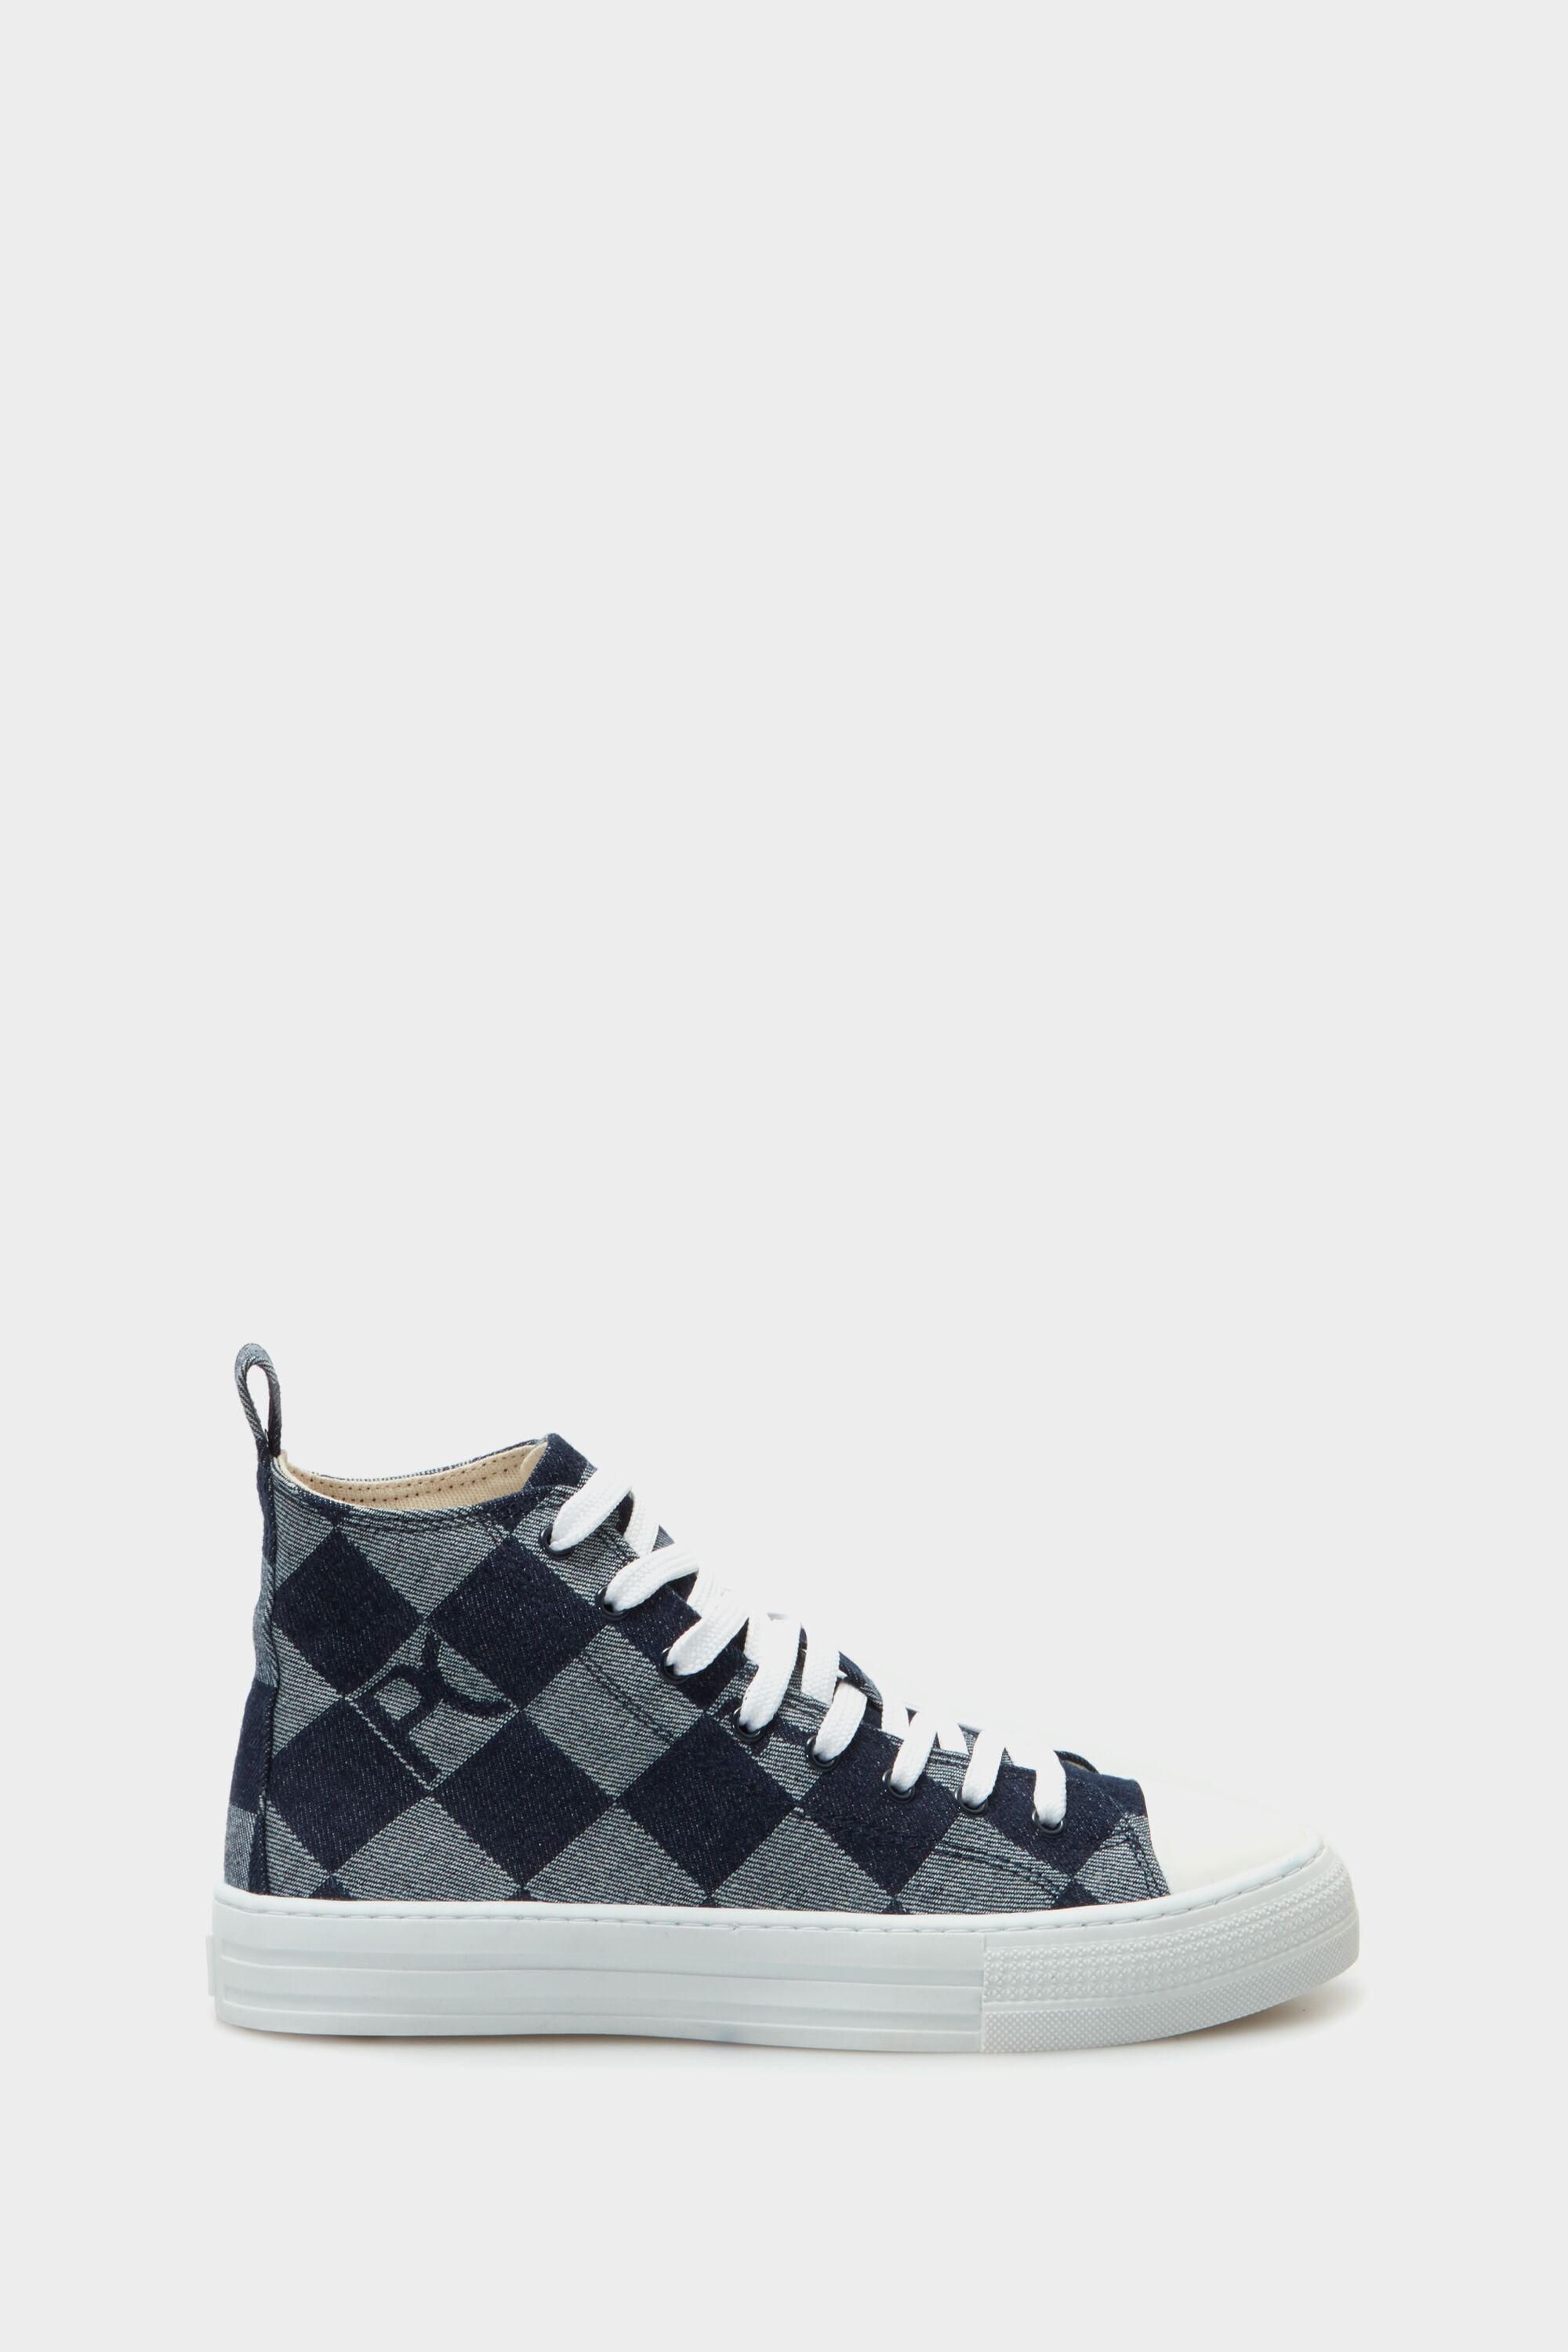 Canvas Cube Denim high-top sneakers